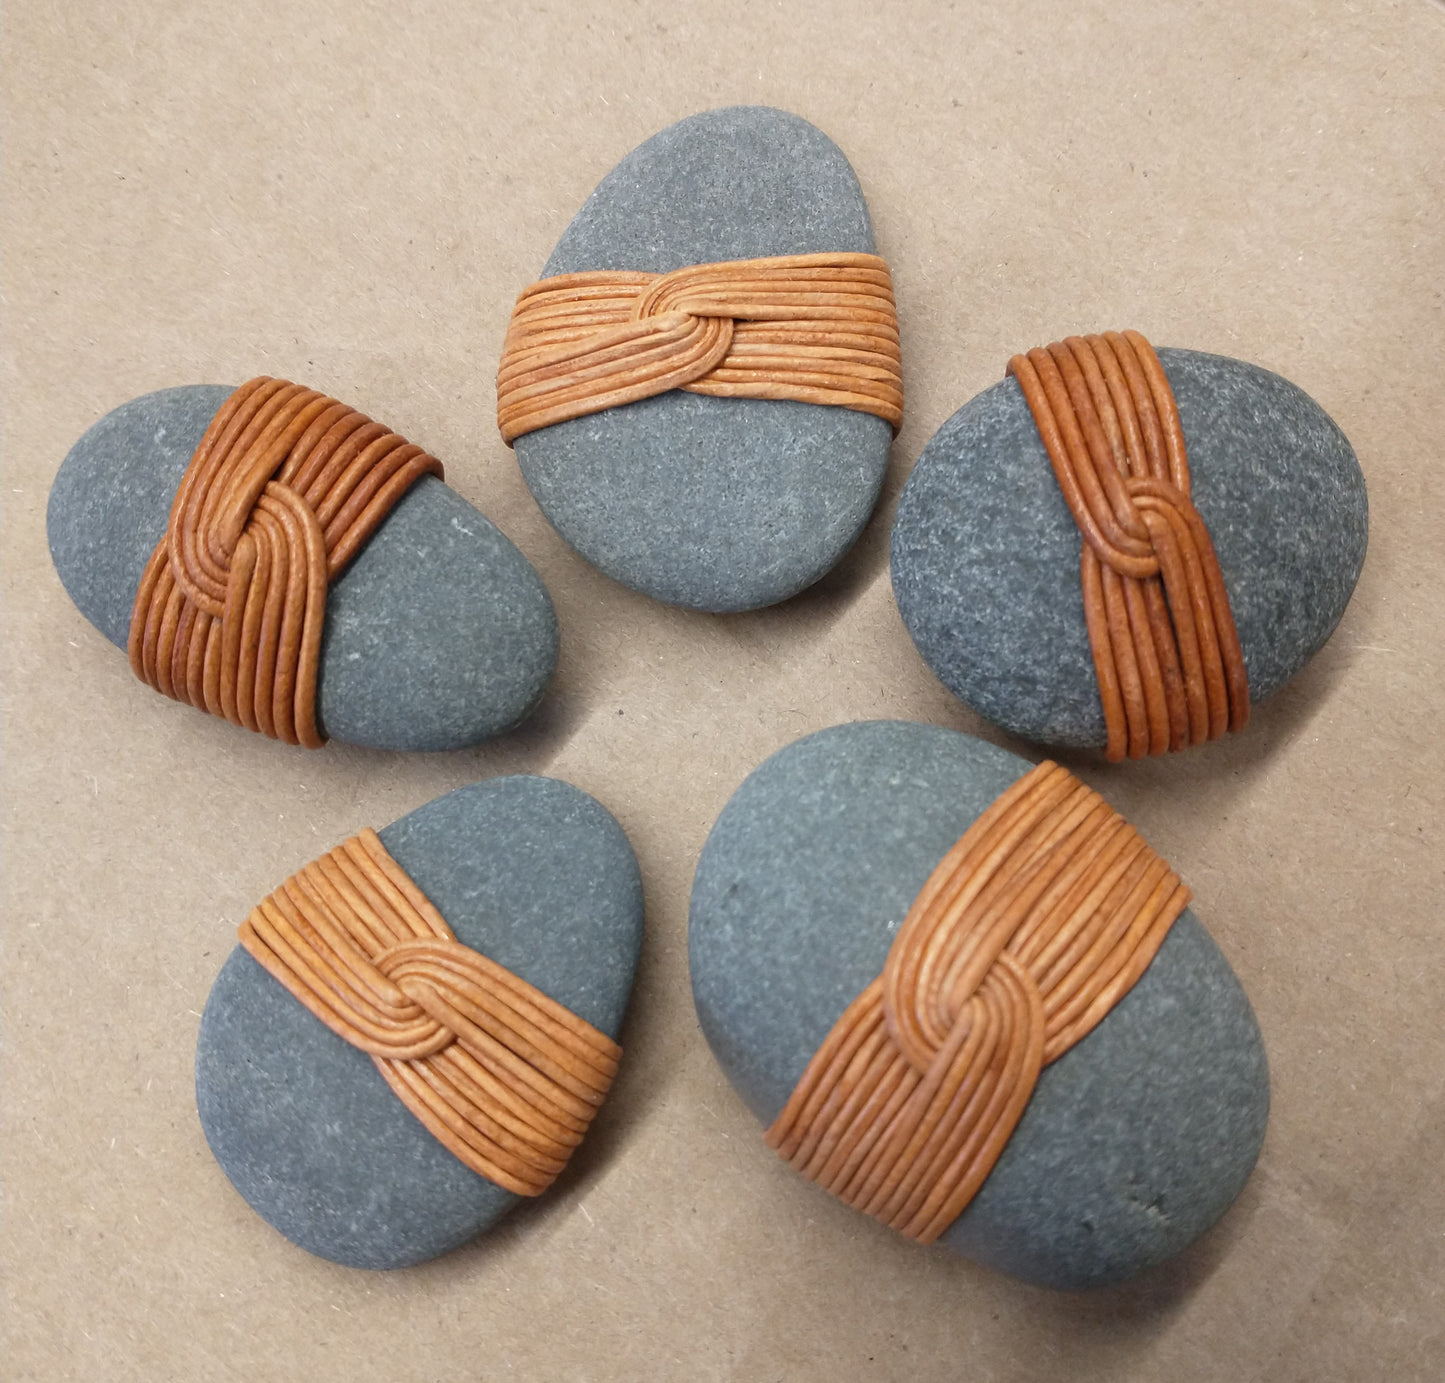 "That's a Wrap" Leather Wrapped Rocks - lot of 12 small wrapped rocks By Jill Terrill